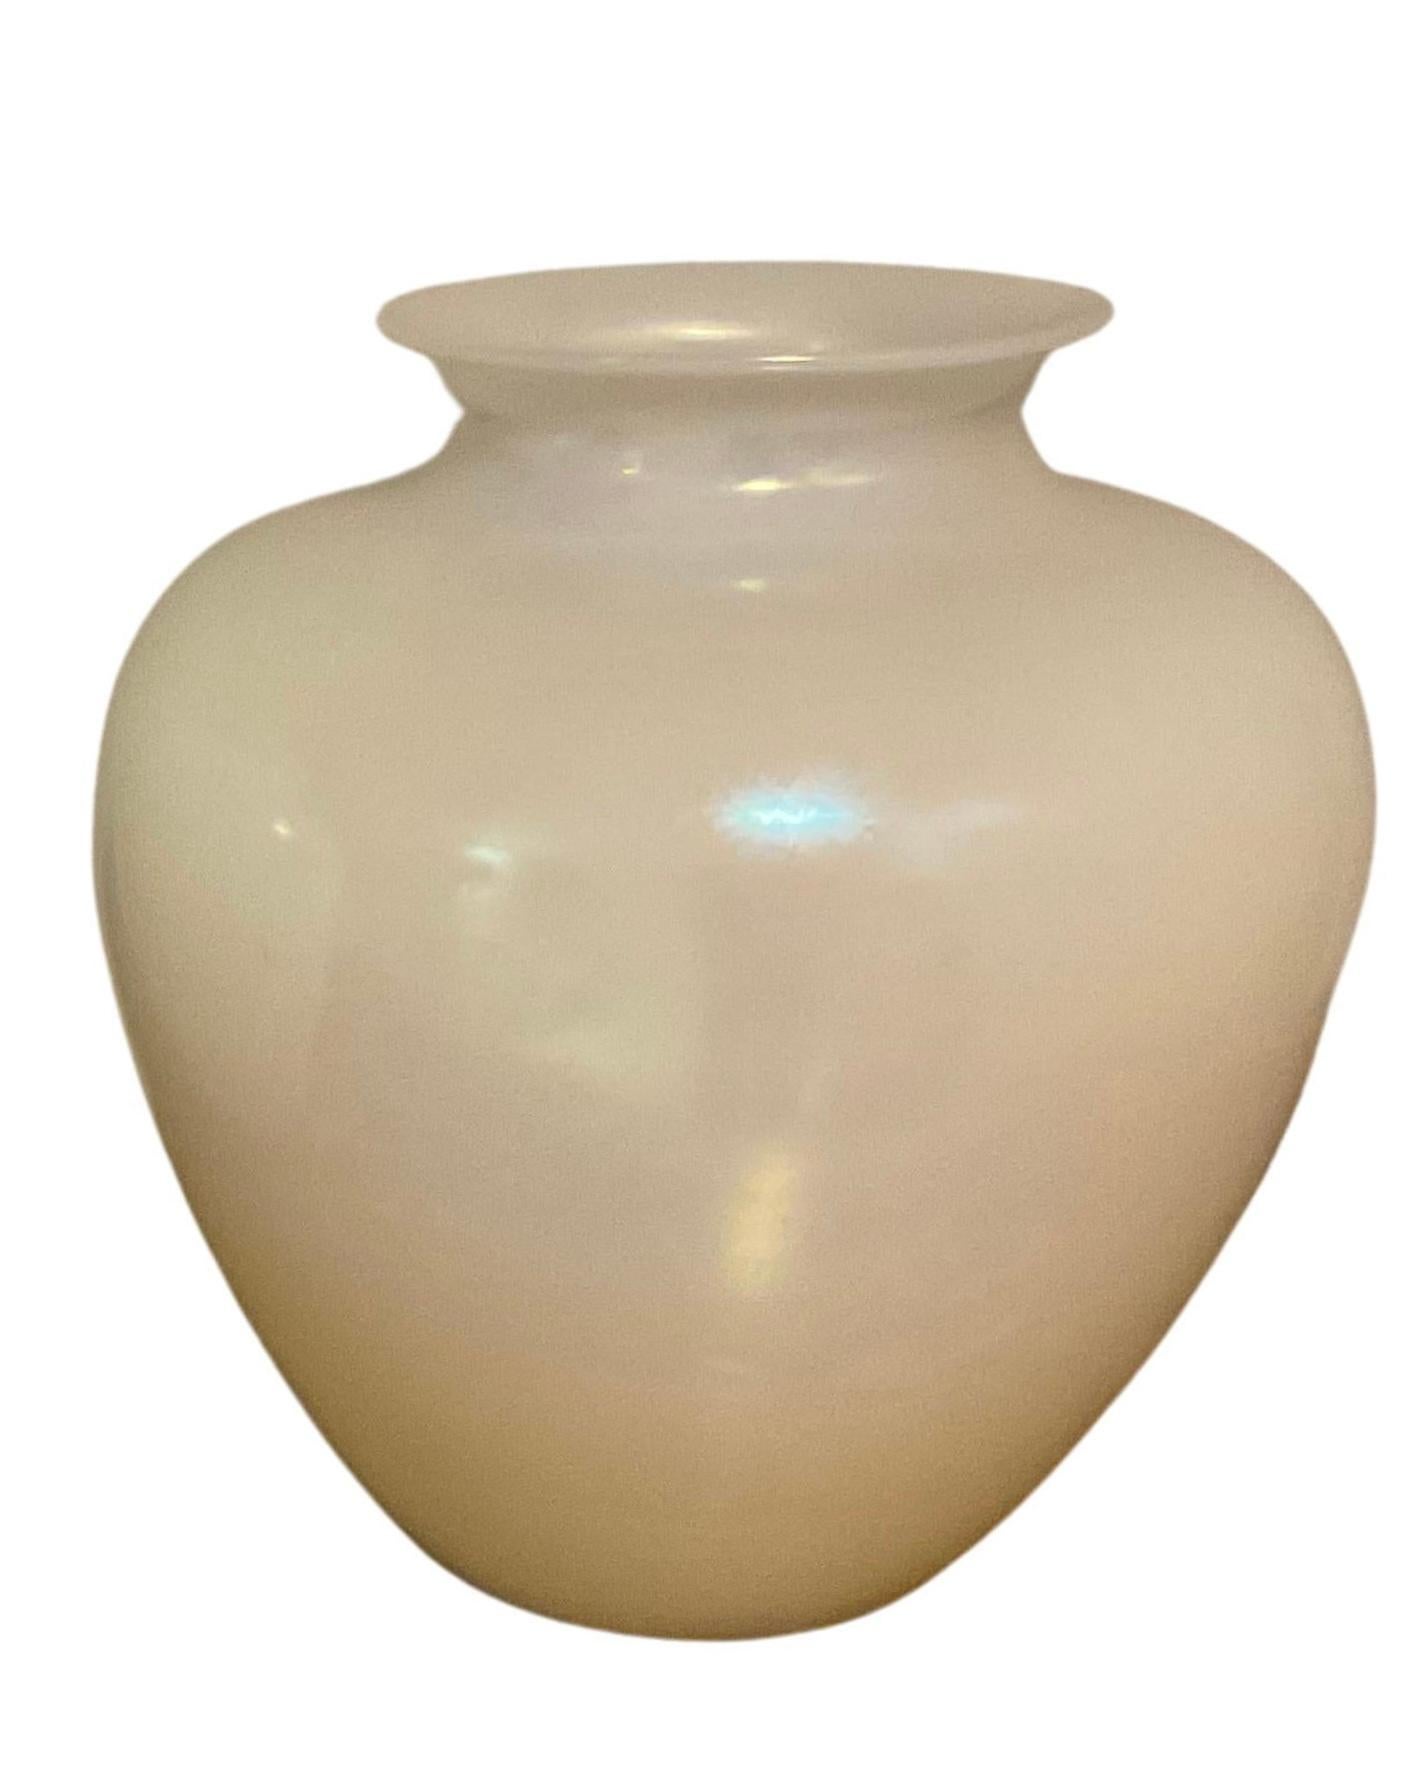 Pair Opal White Calcite Steuben Art Glass Vases with irredescent finish In Good Condition For Sale In Ann Arbor, MI